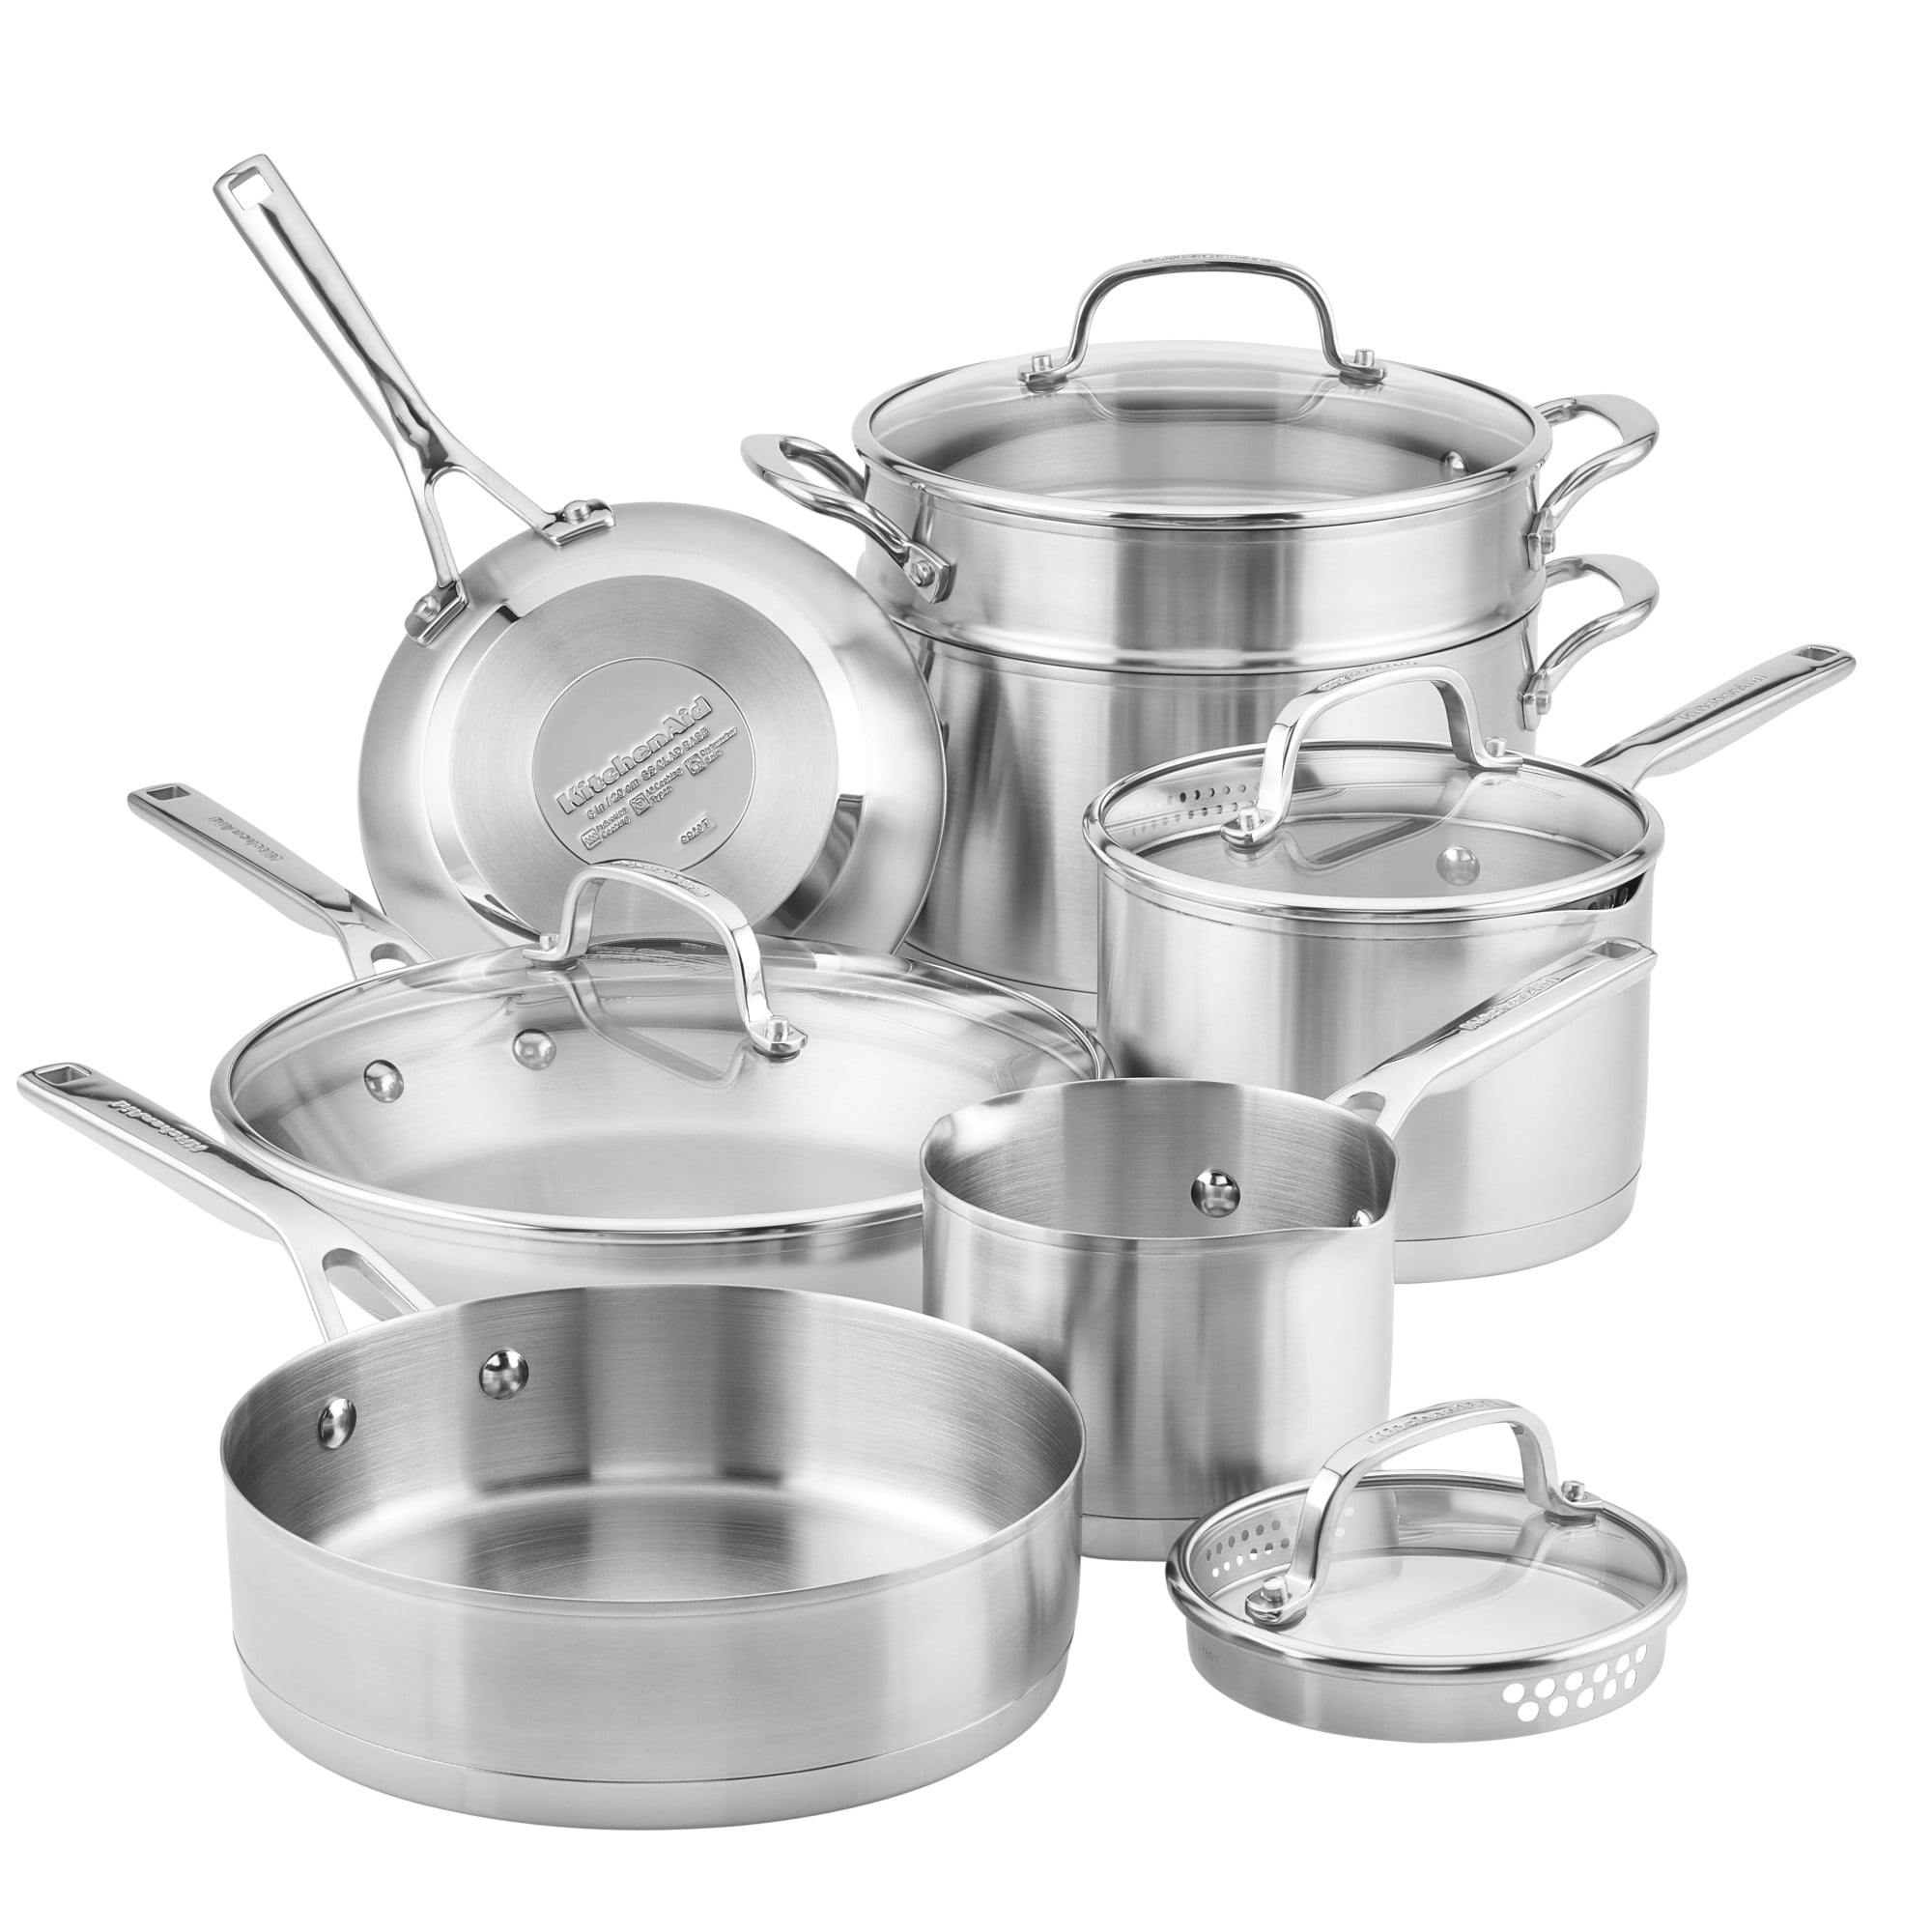 KitchenAid 11-Piece 3-Ply Base Stainless Steel Pots and Pans/Cookware Stainless Steel Cookware Set Walmart